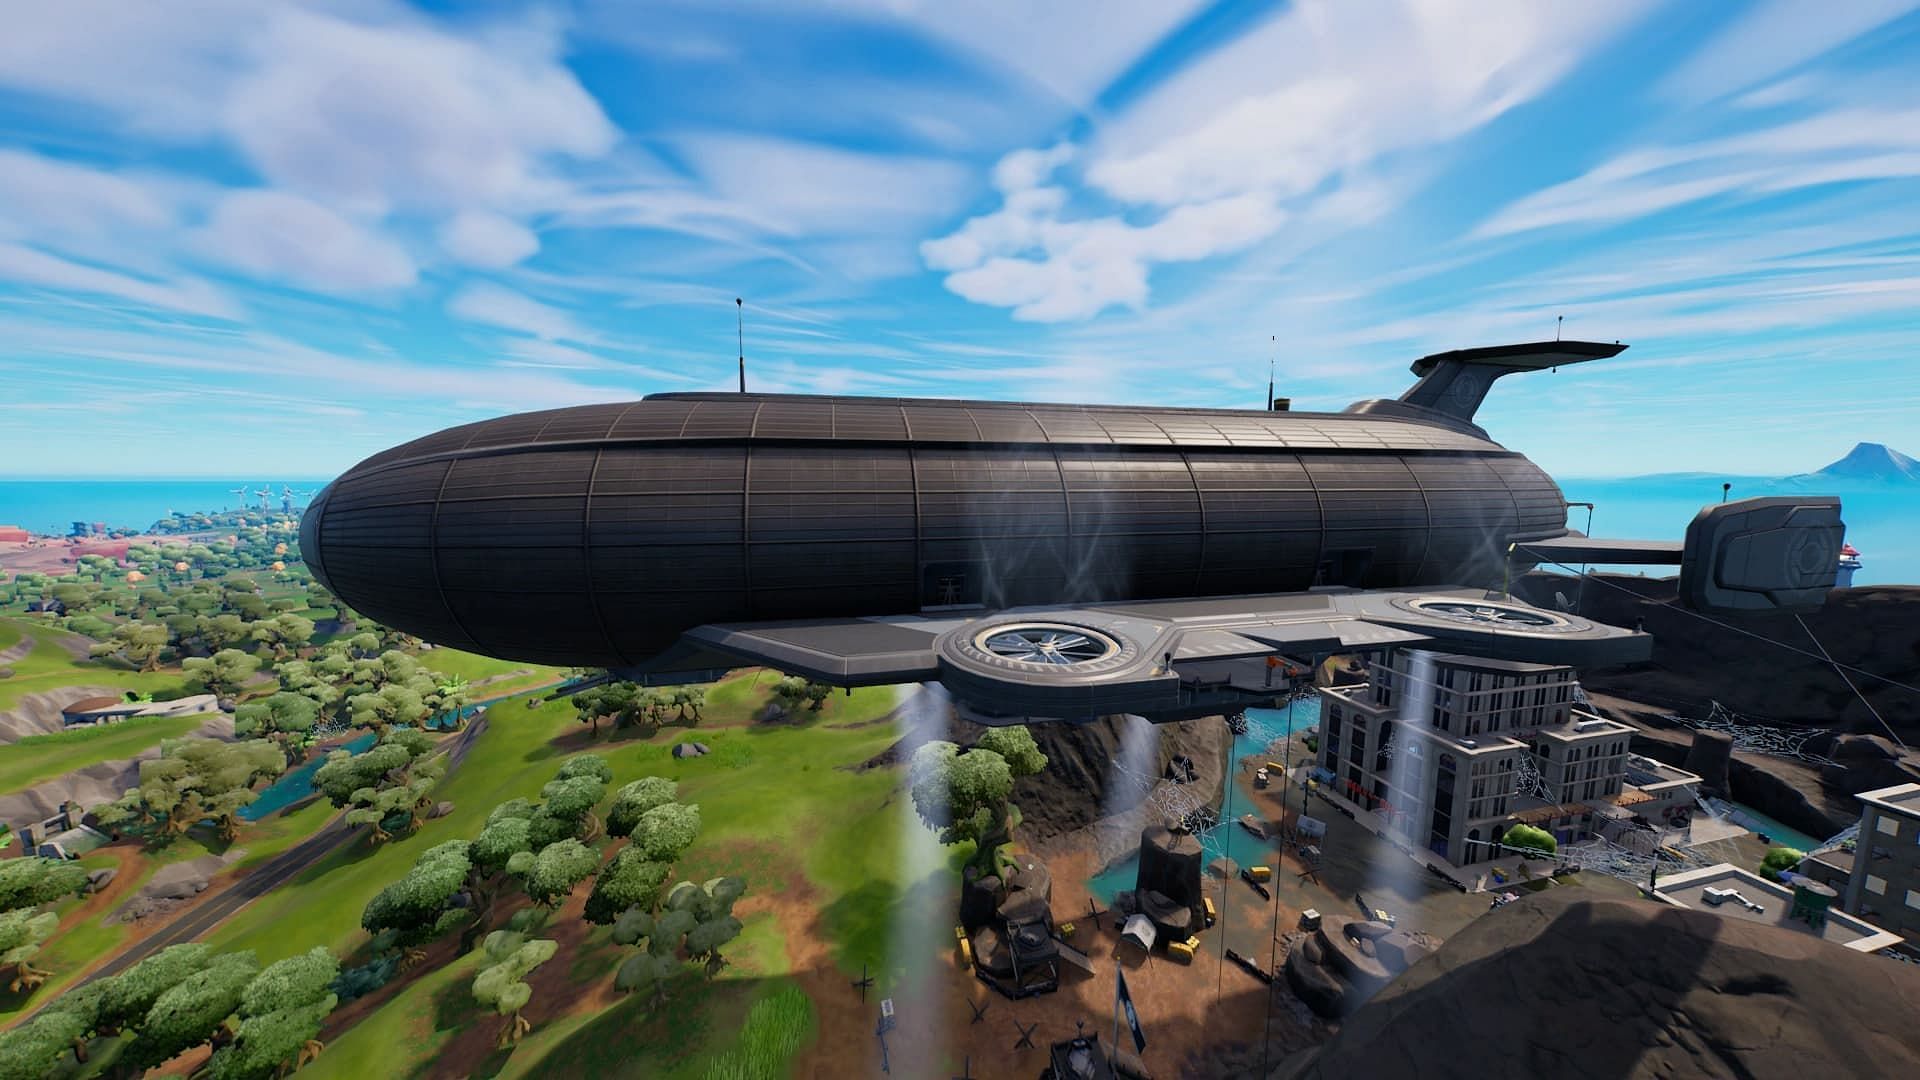 A look at one of several IO Airships or Blimps that fly above the island (Image via Epic Games)